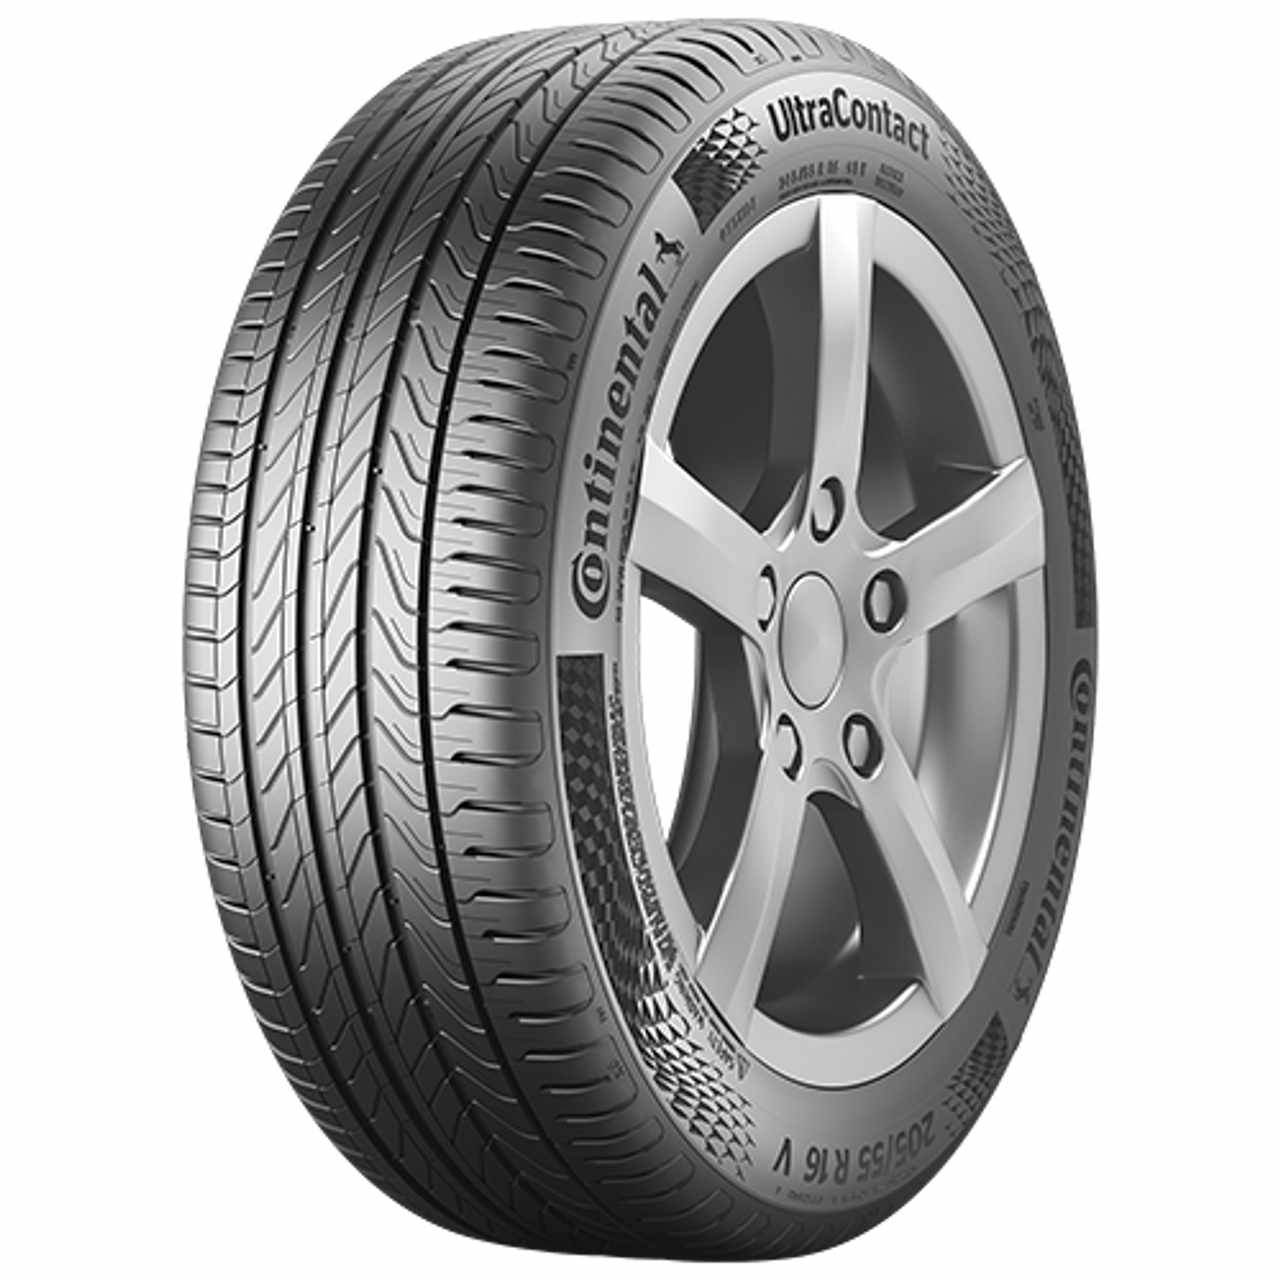 CONTINENTAL ULTRACONTACT (EVc) 215/60R16 99H FR BSW XL